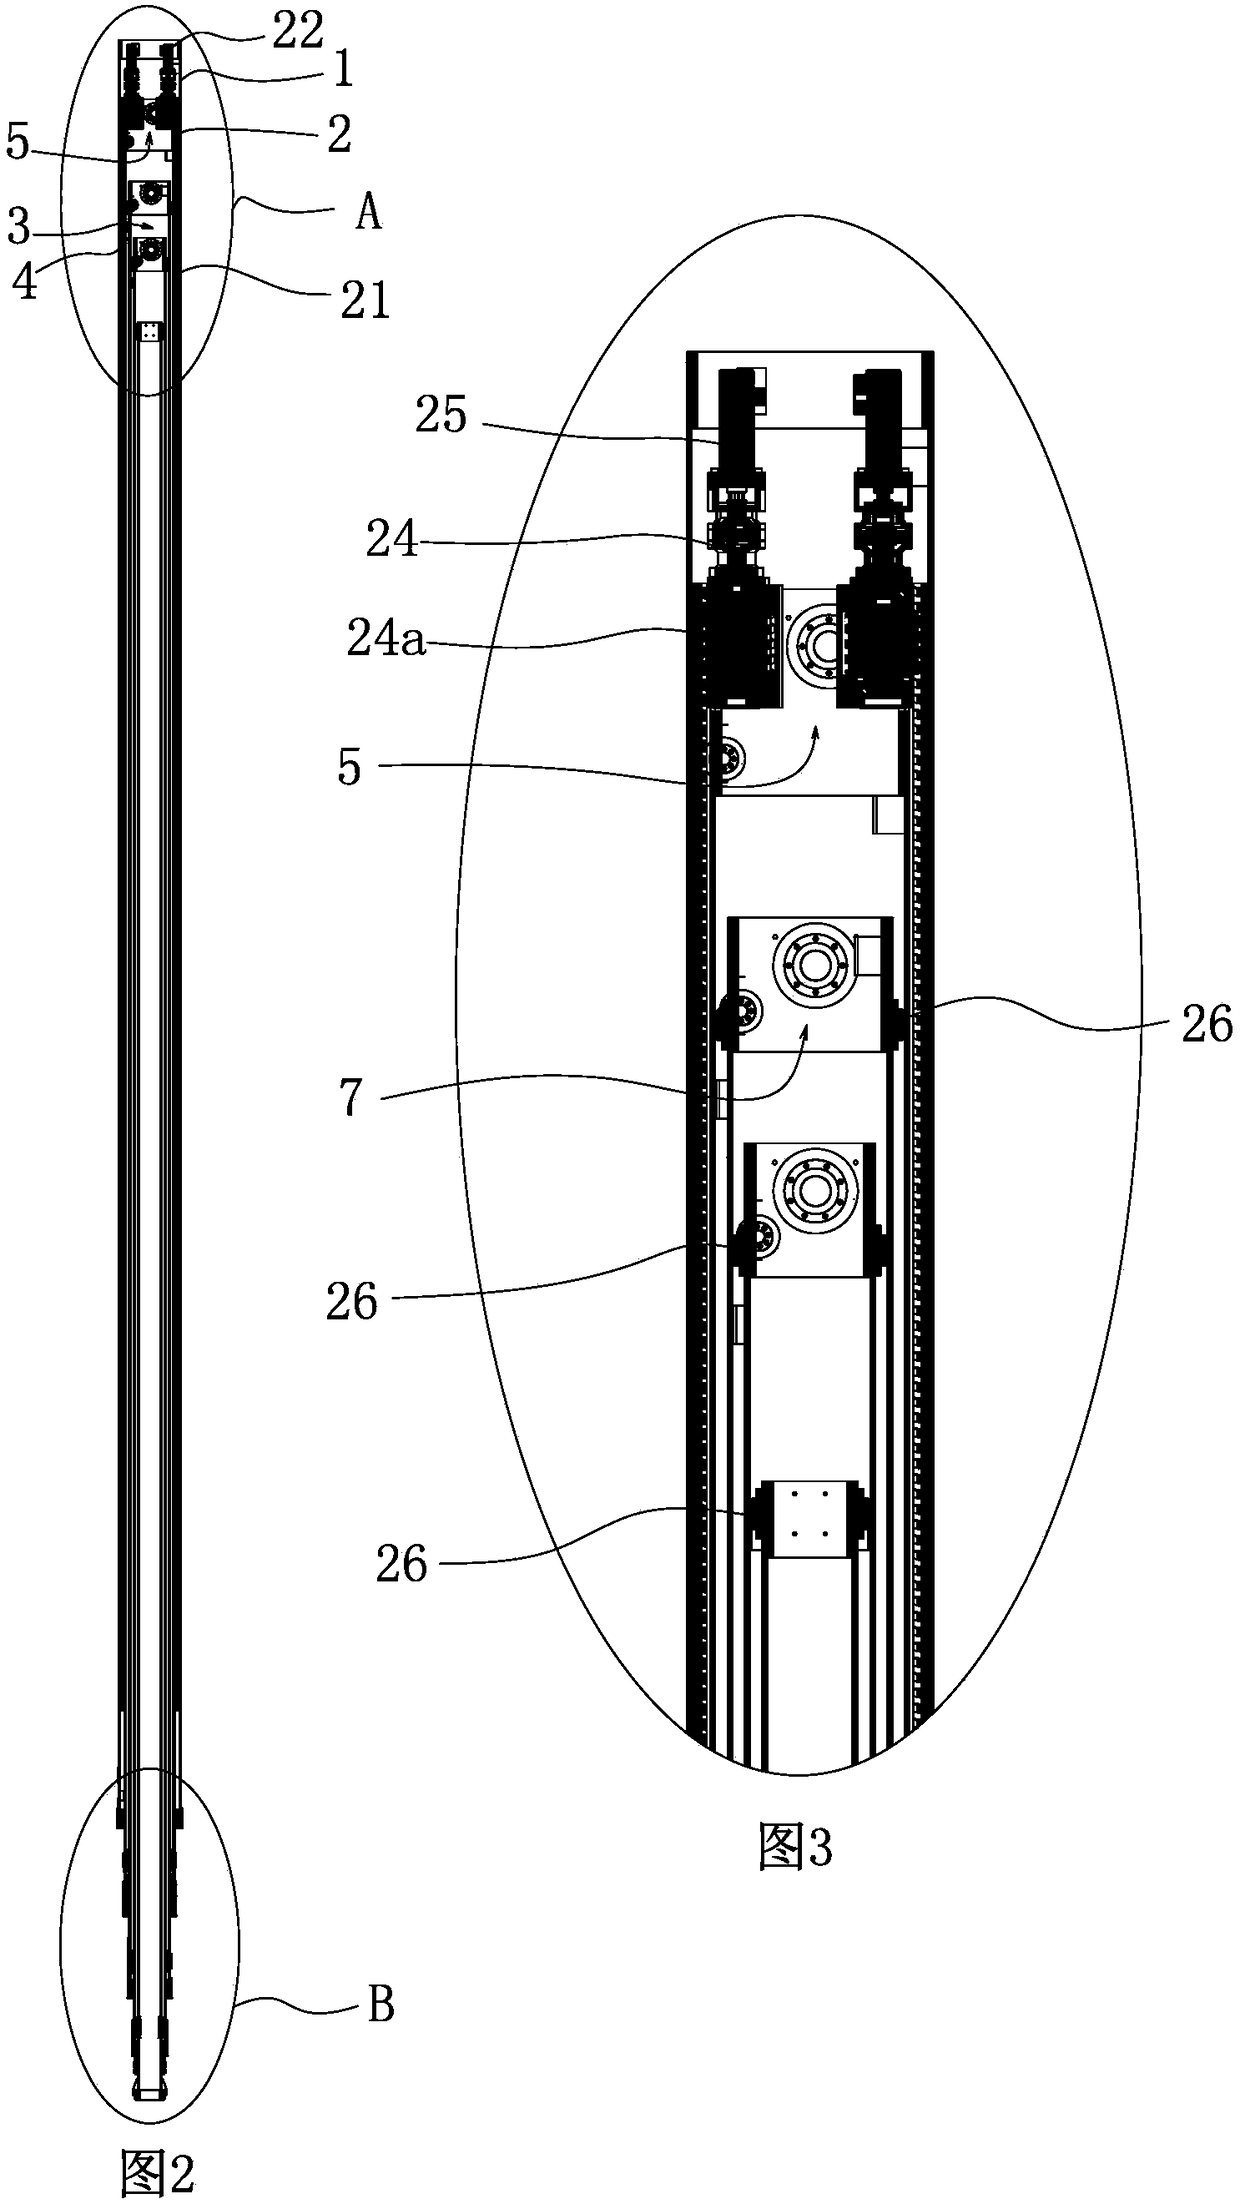 Meshing-telescopic-type telescopic drilling rod assembly